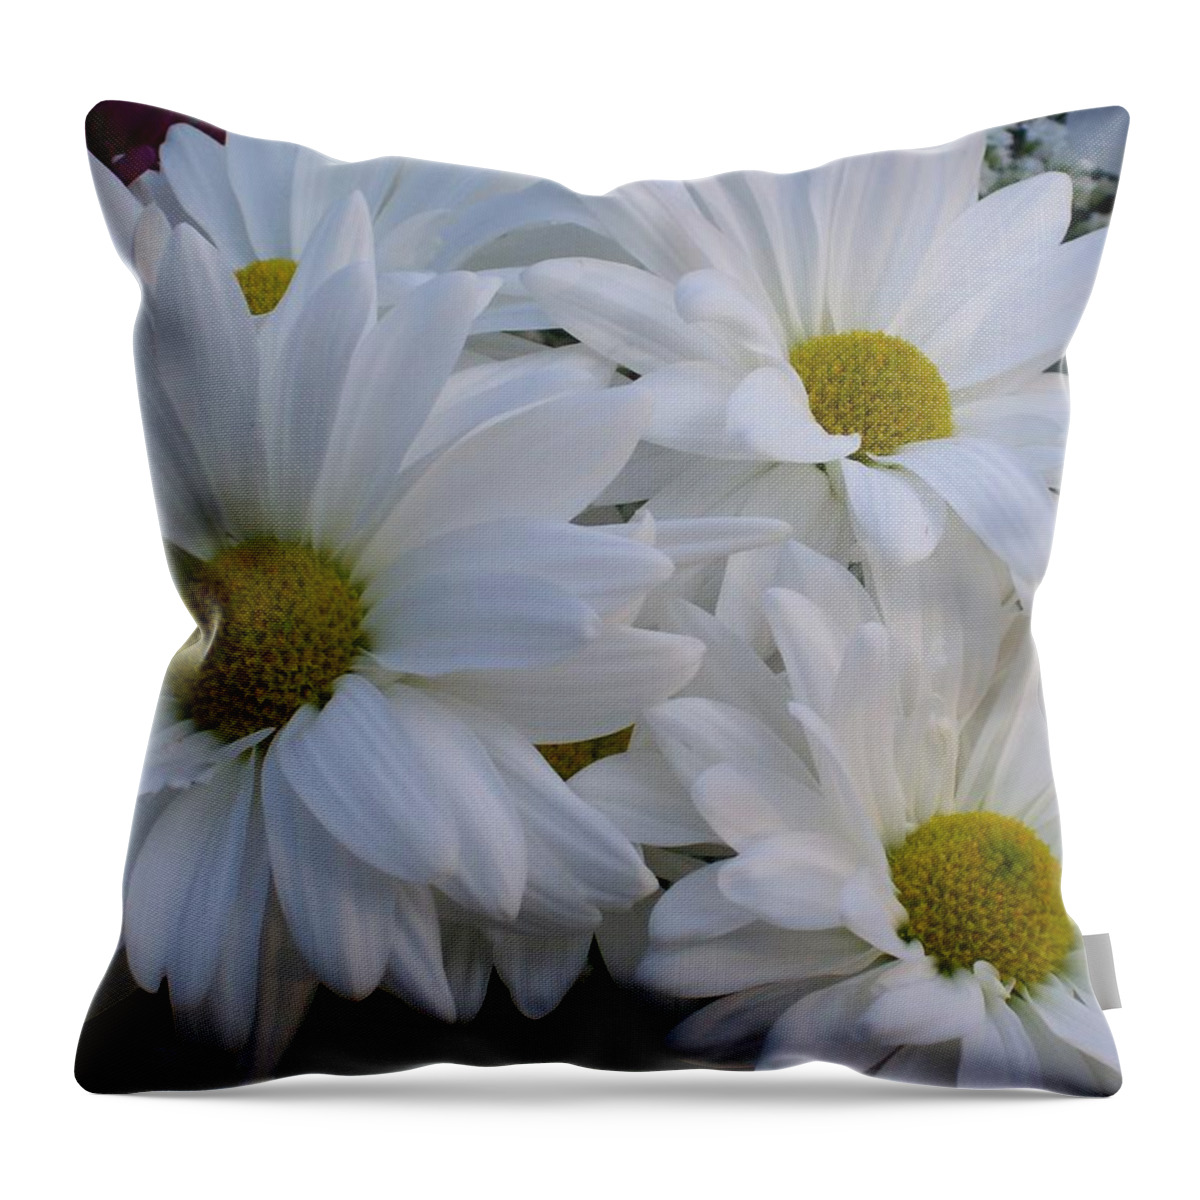 White Daisy Bouquet Throw Pillow featuring the photograph Daisy Bouquet by Belinda Lee